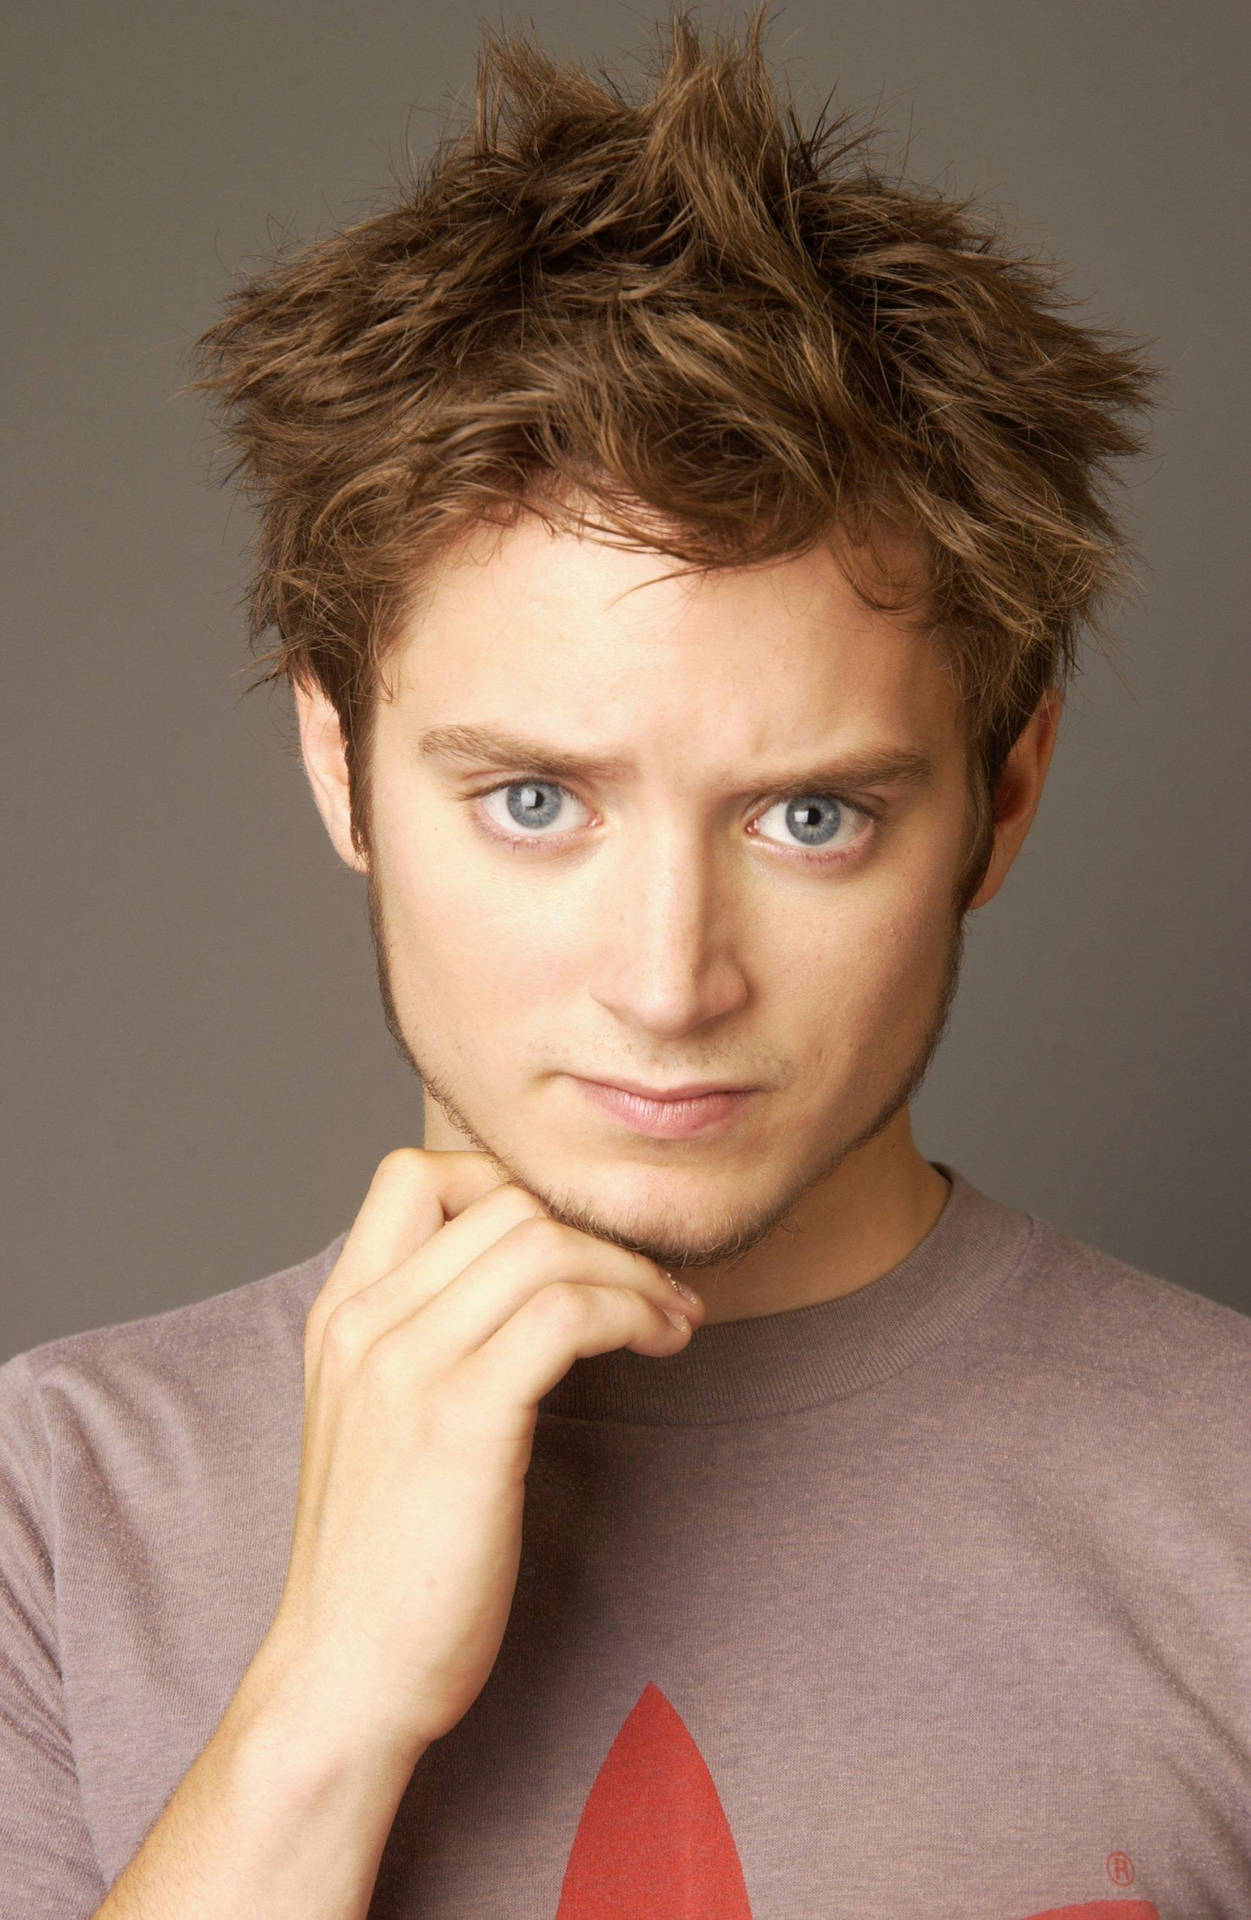 Elijah Wood With A Frizzy Brown Hair Wallpaper